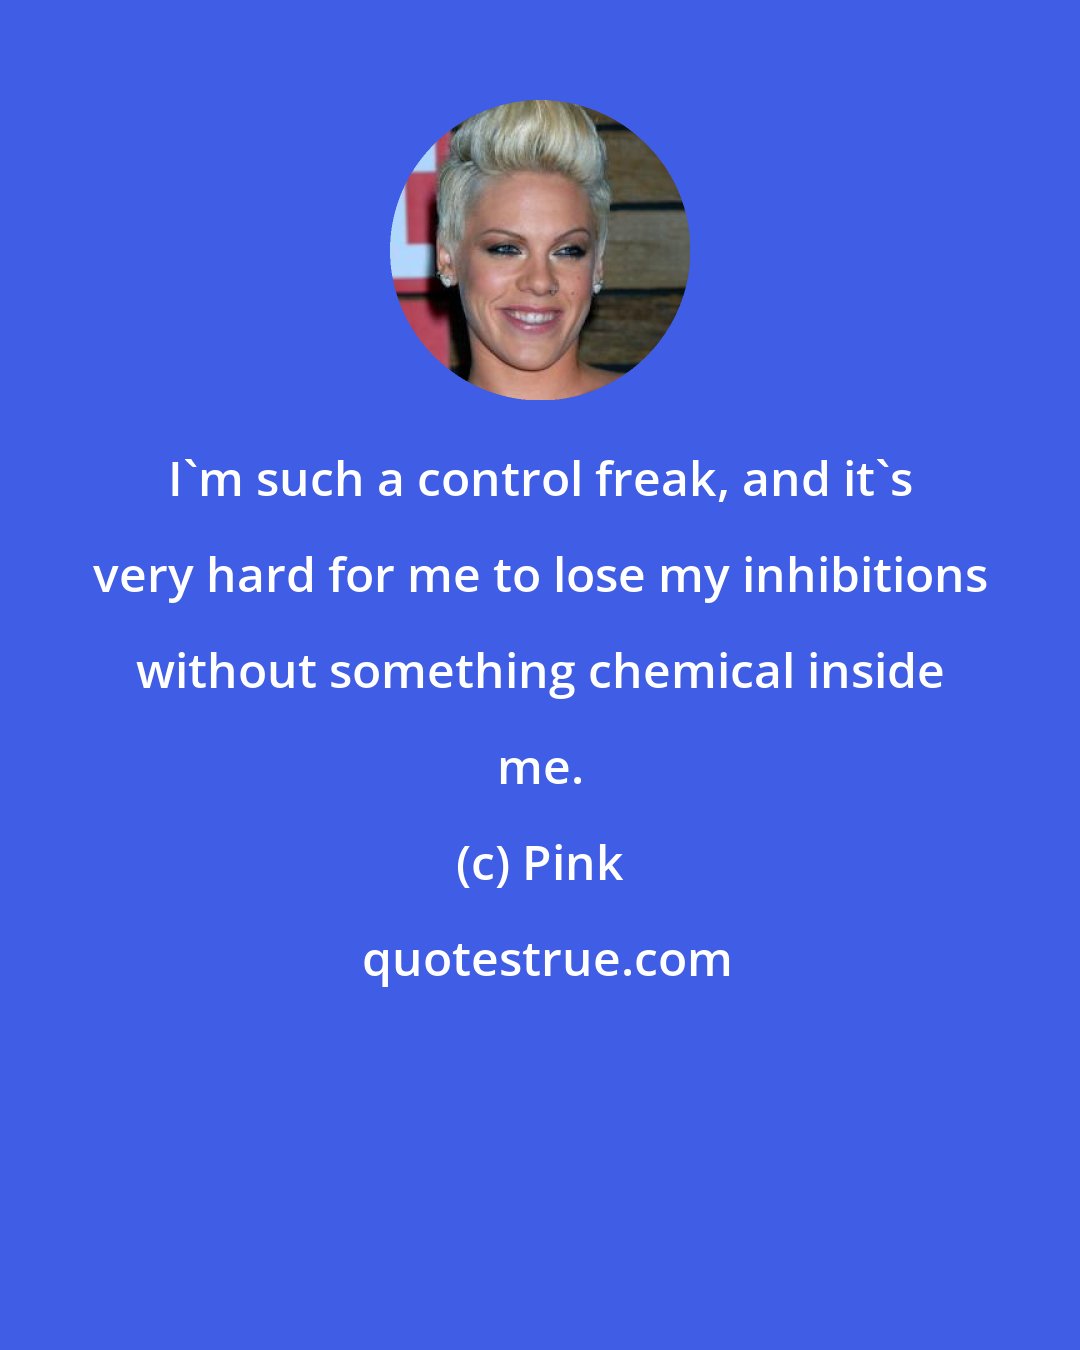 Pink: I'm such a control freak, and it's very hard for me to lose my inhibitions without something chemical inside me.